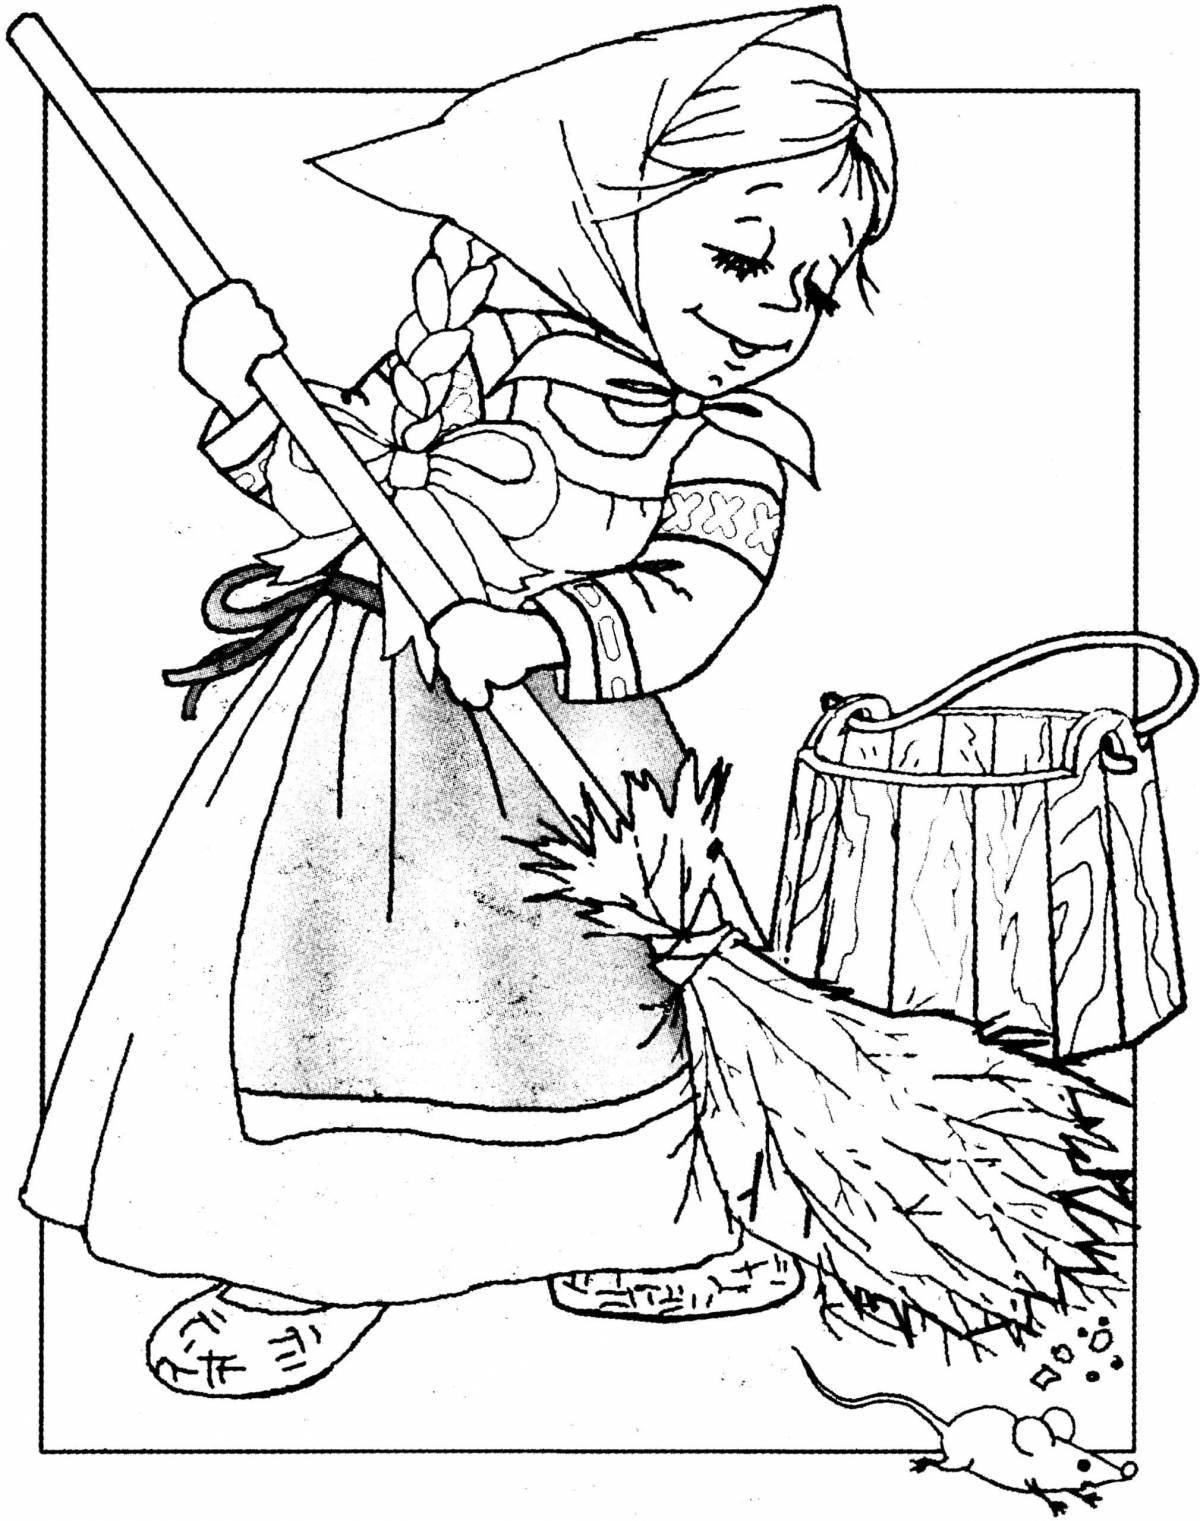 Charming needlewoman and sloth coloring book